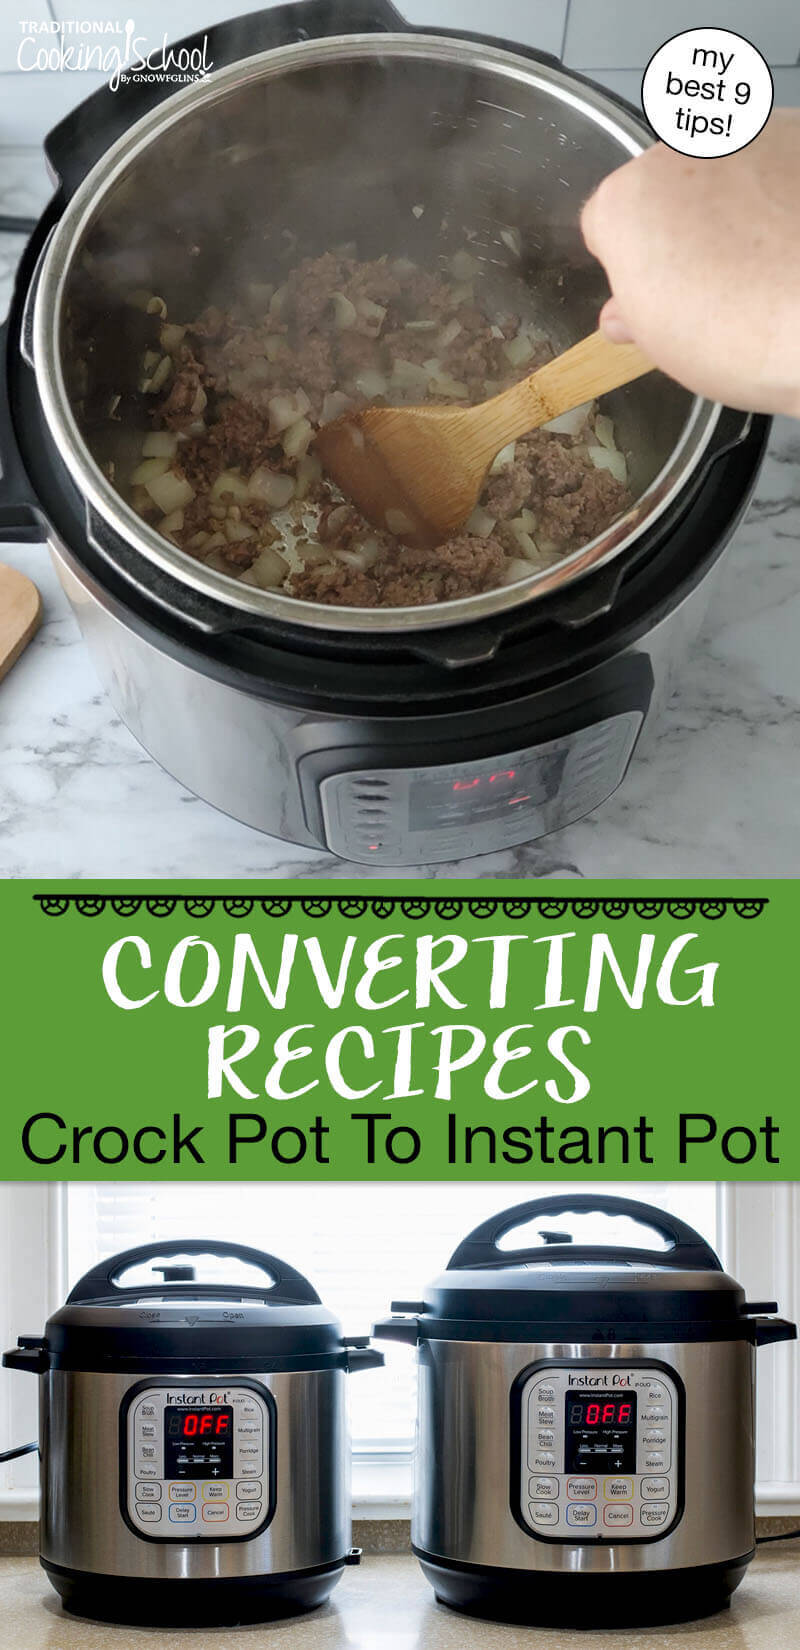 Photo collage of two Instant Pots on a countertop, and browning beef in an Instant Pot set to the "Saute" function. Text overlay says: "Converting Recipes Crock Pot To Instant Pot (my best 9 tips)"